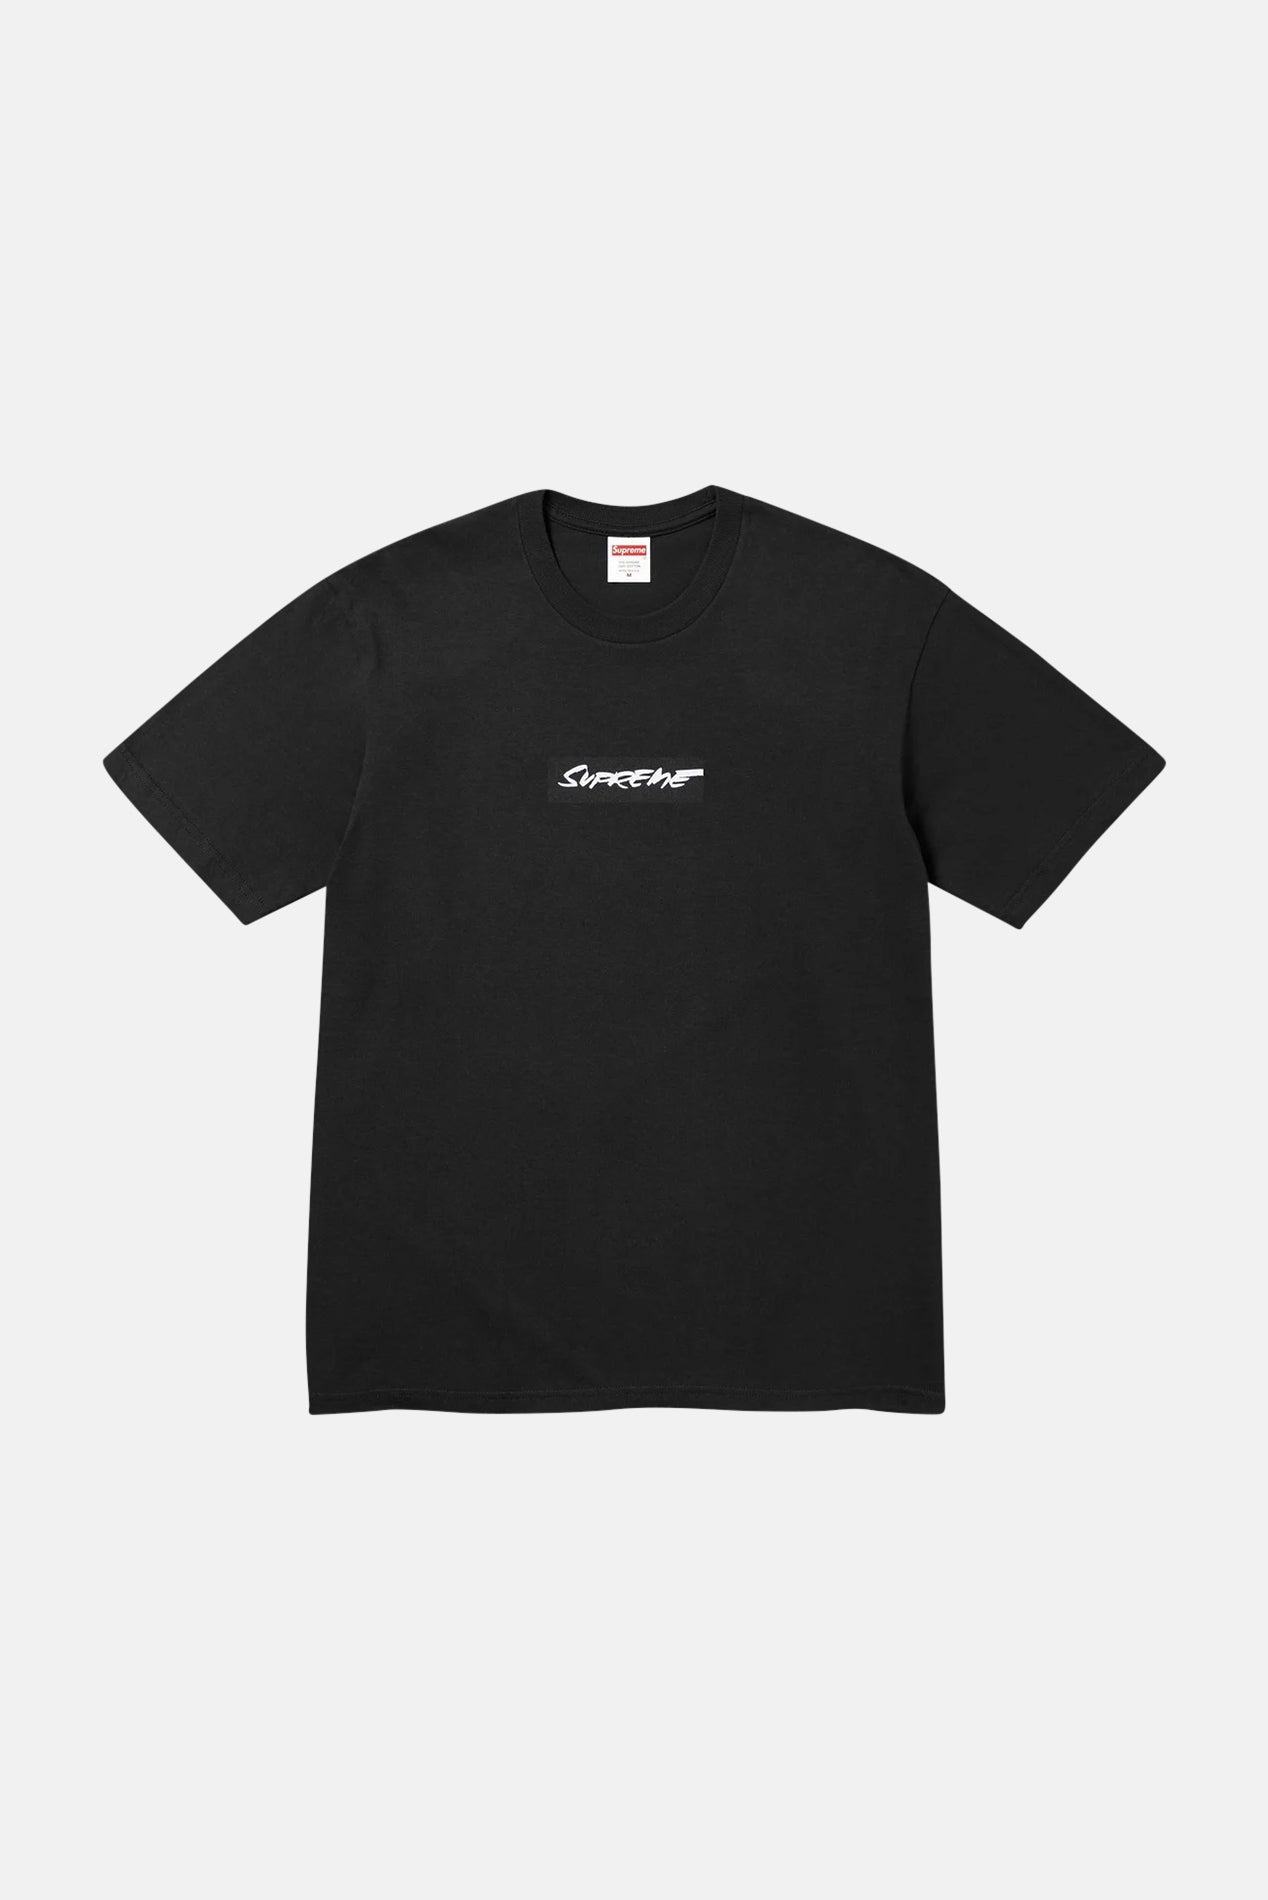 Supreme Fighter Tee Charcoal